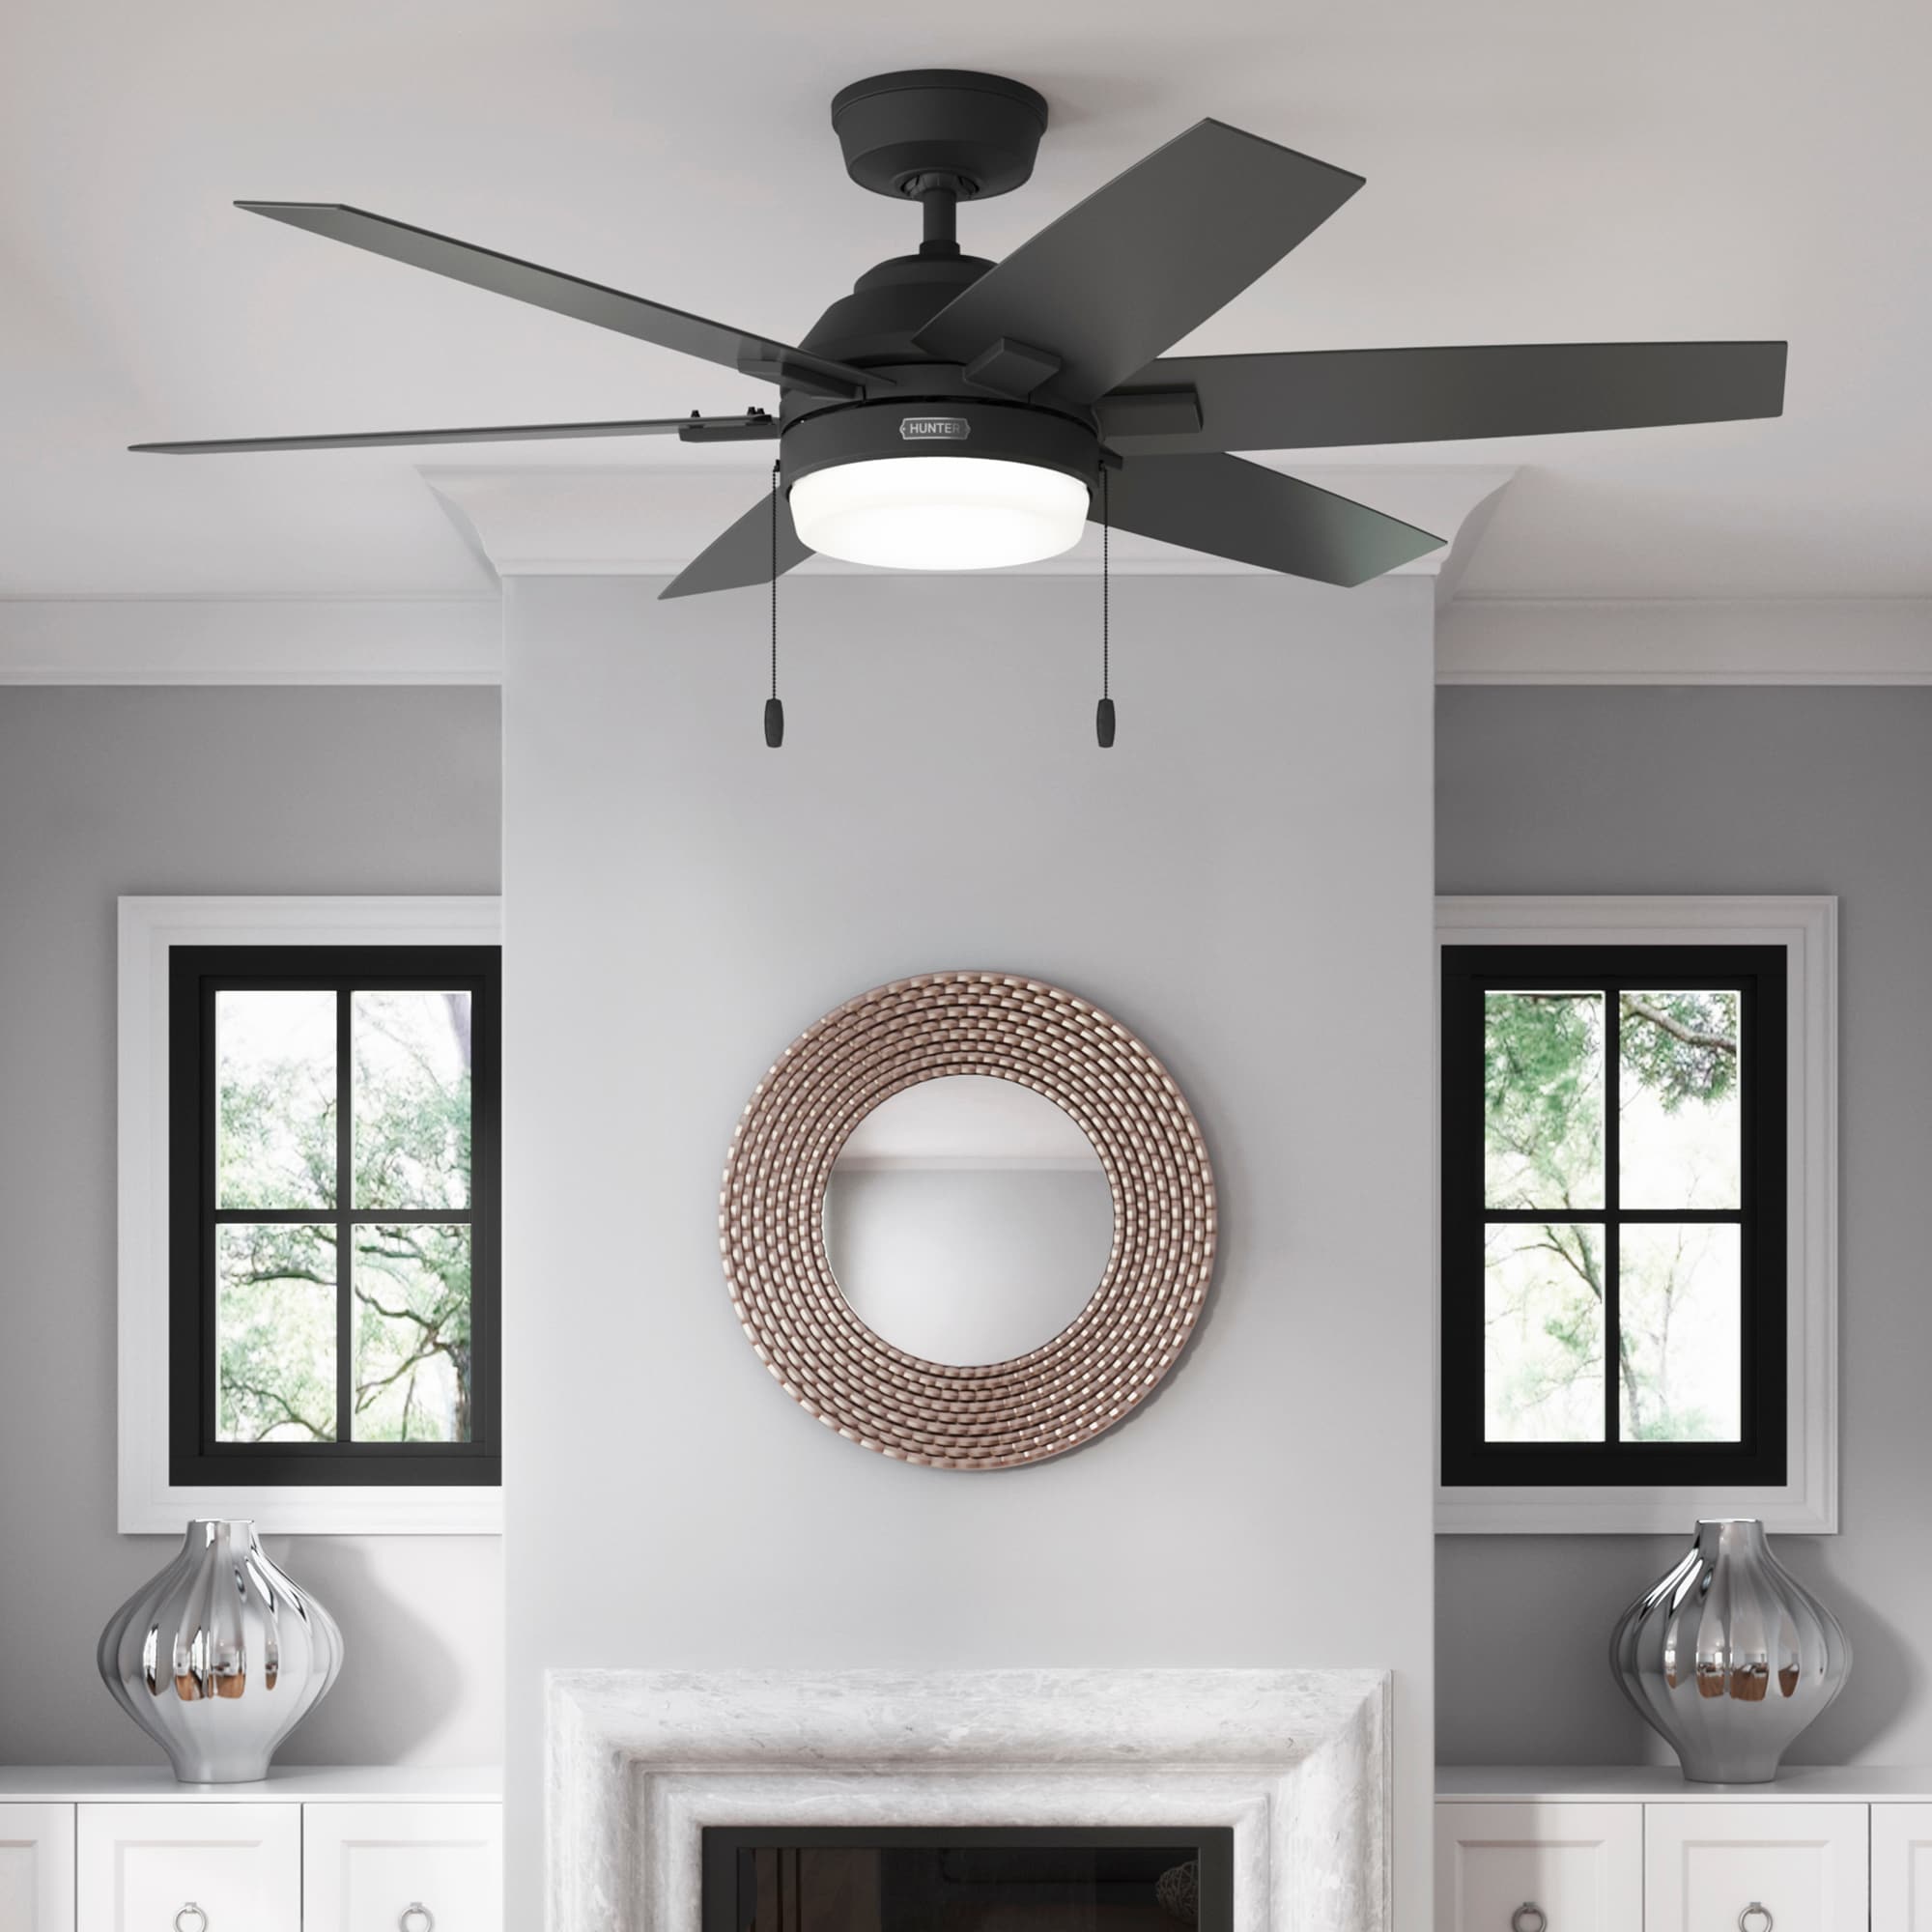 Hunter Toledo Easy Install 52 In Matte Black Indoor Ceiling Fan With Light 6 Blade The Fans Department At Lowes Com